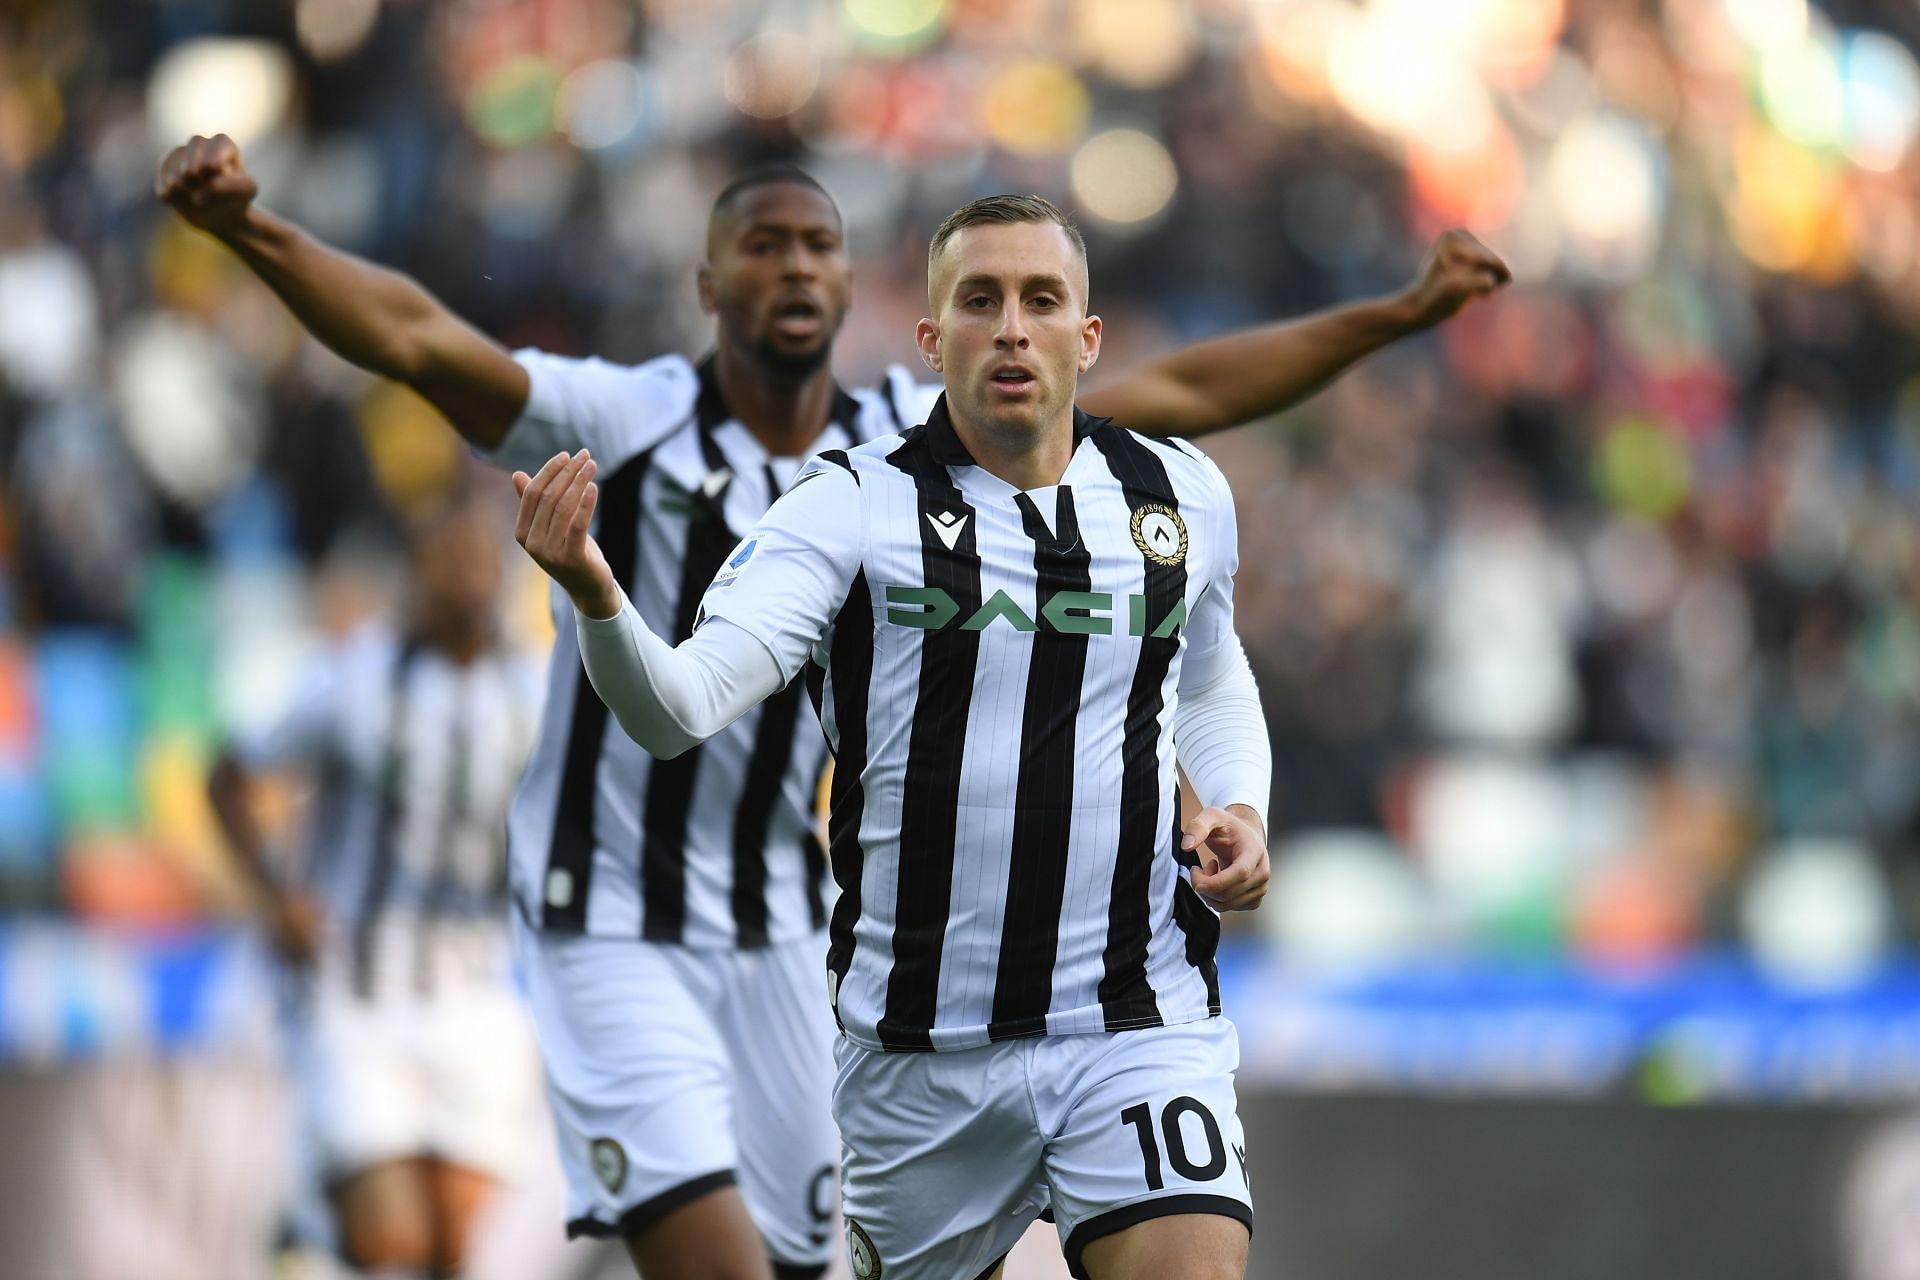 Udinese are looking to climb up the table